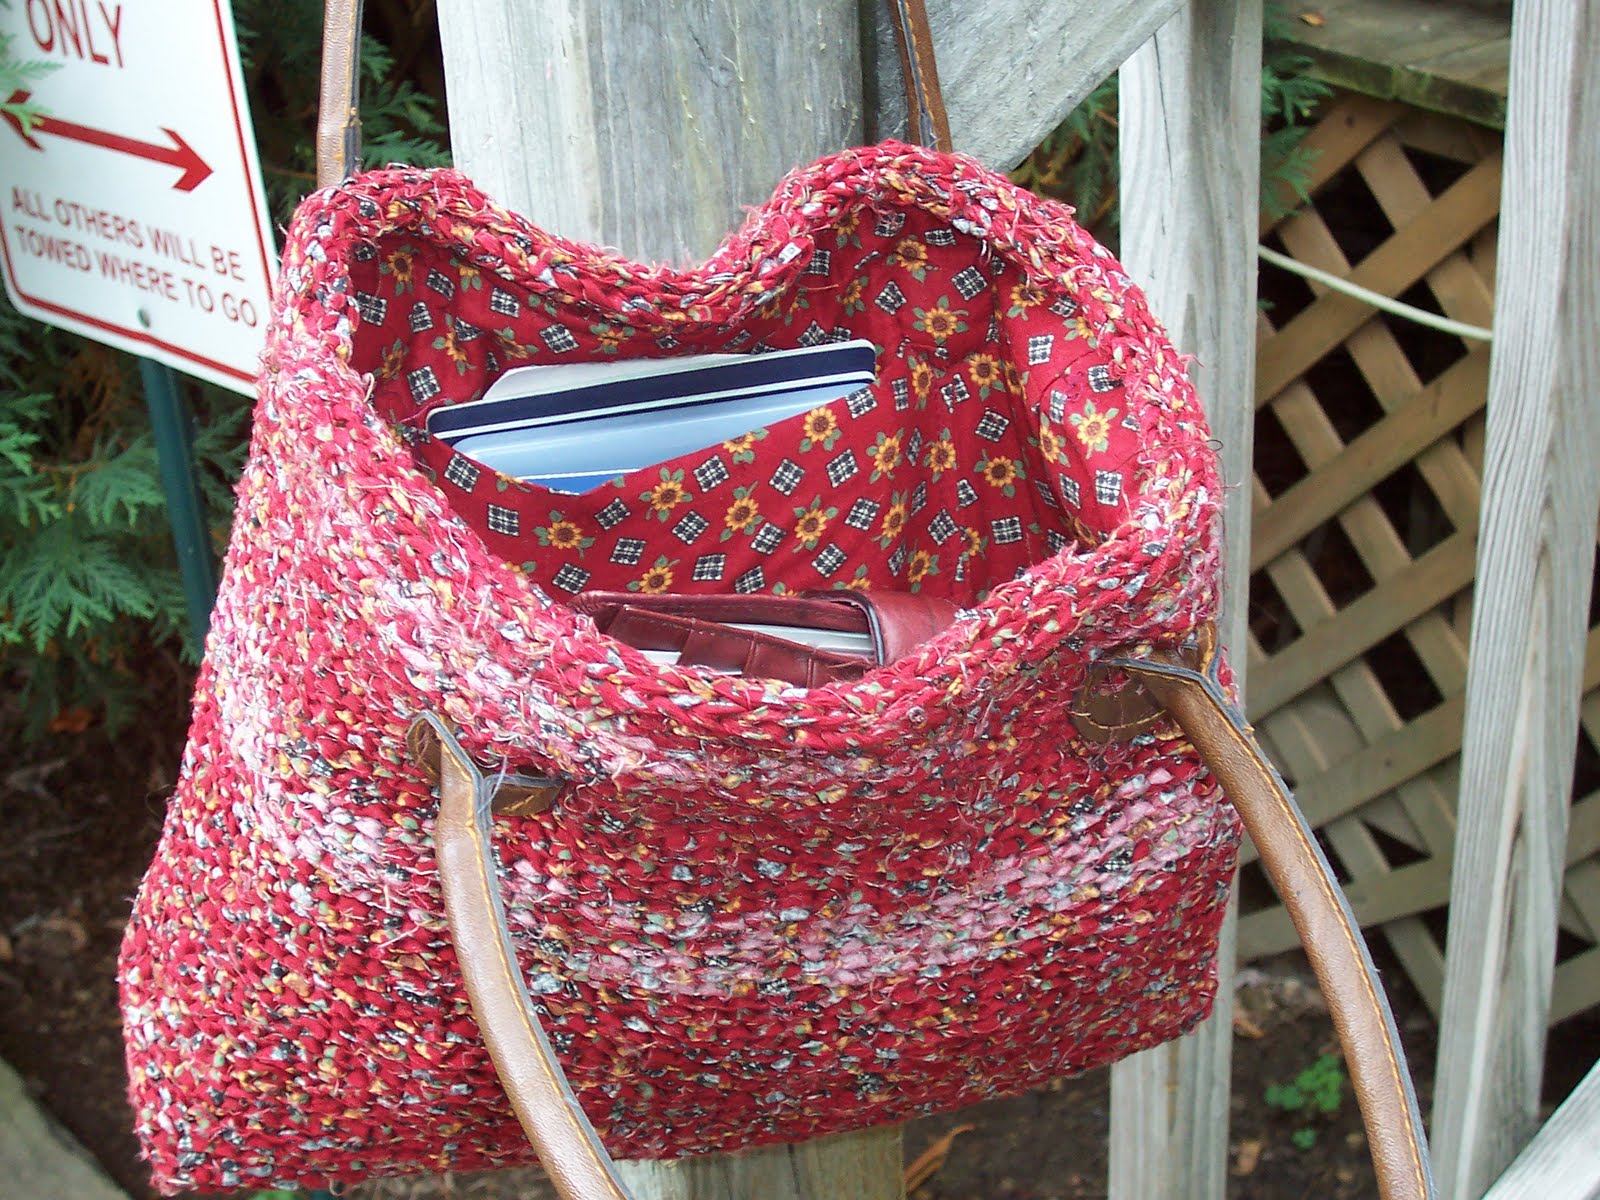 Grannypurl: Another fabric strip/rag knit bag